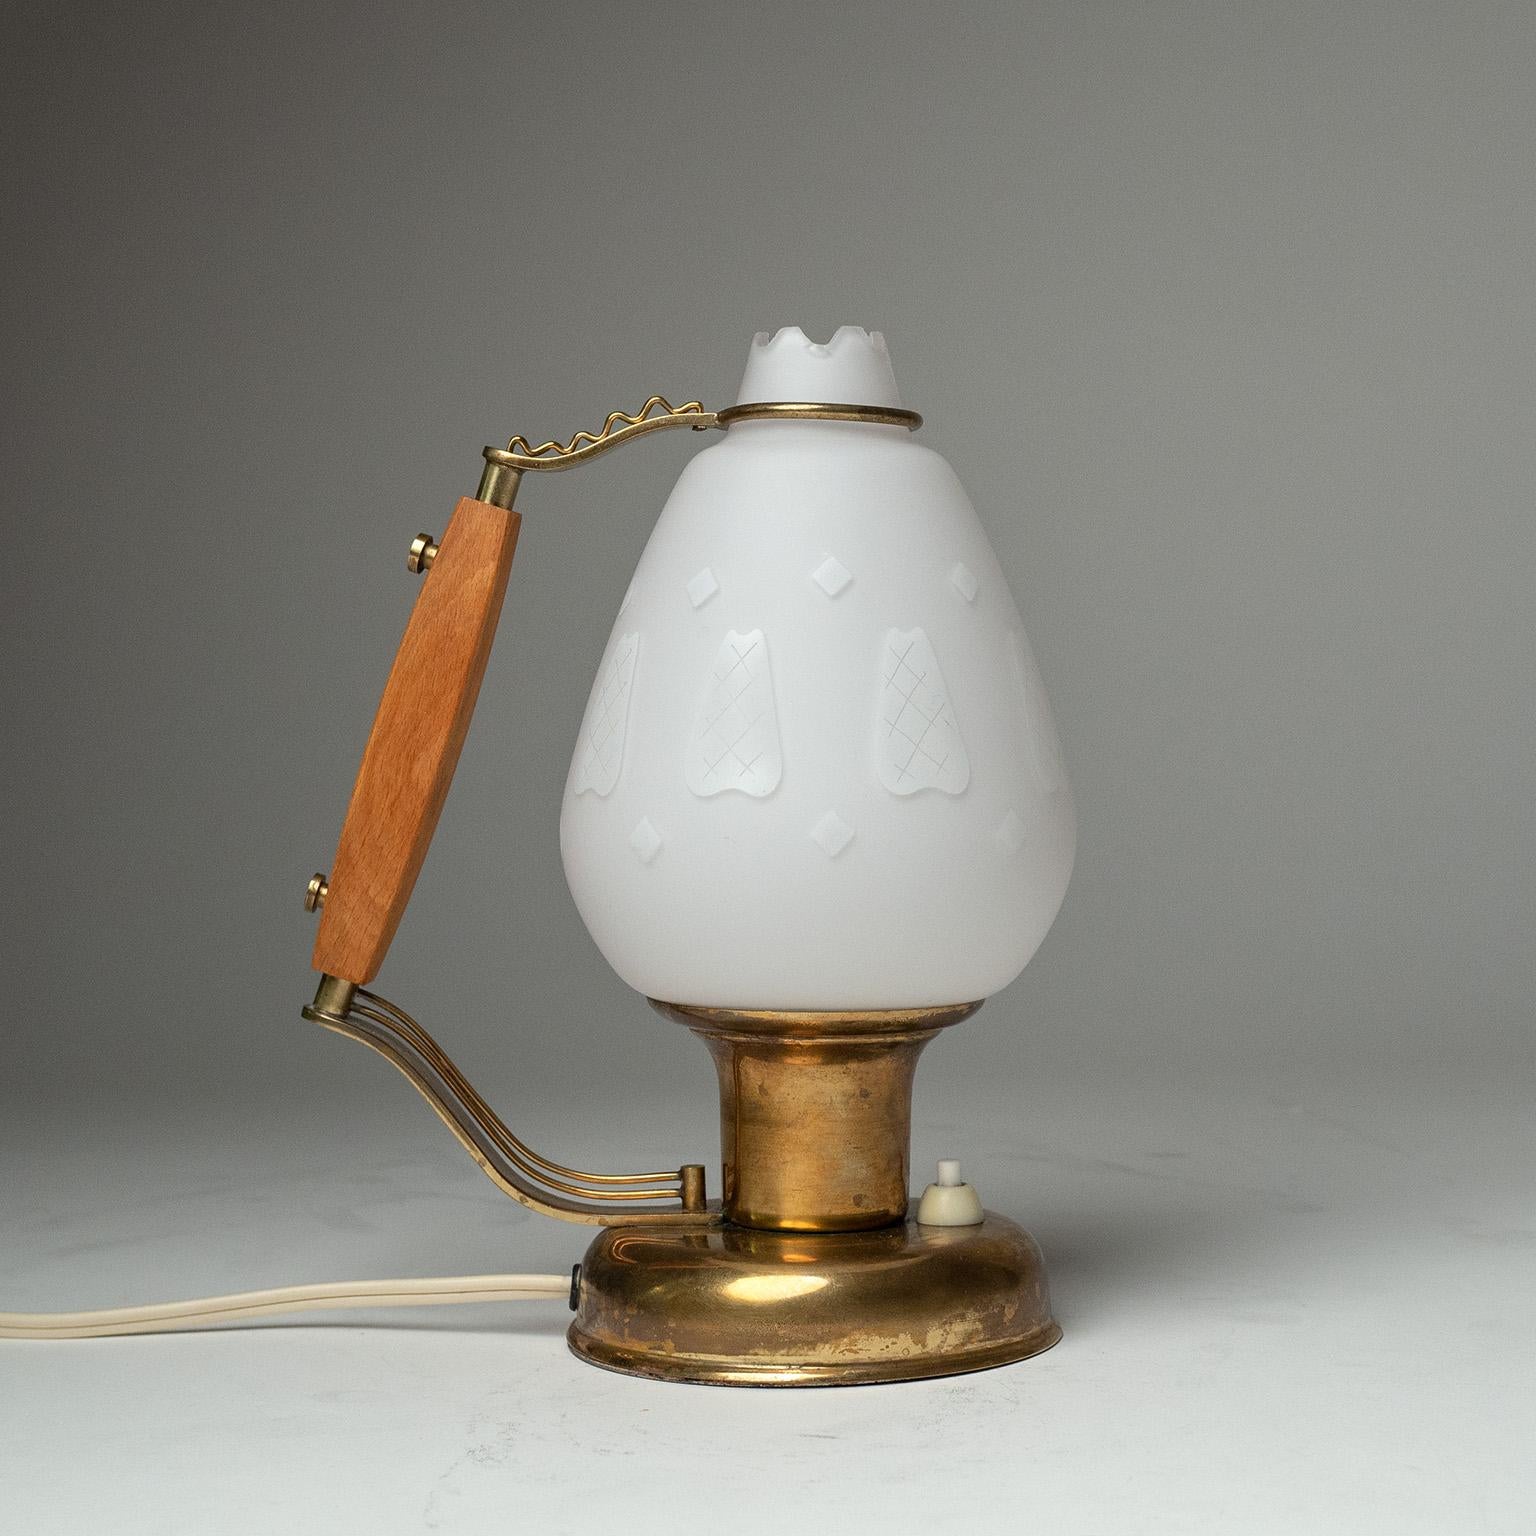 Delightful Swedish table lamp from the 1940s. Brass base and details with a beech grip and satin glass diffuser which has enameled decorations.